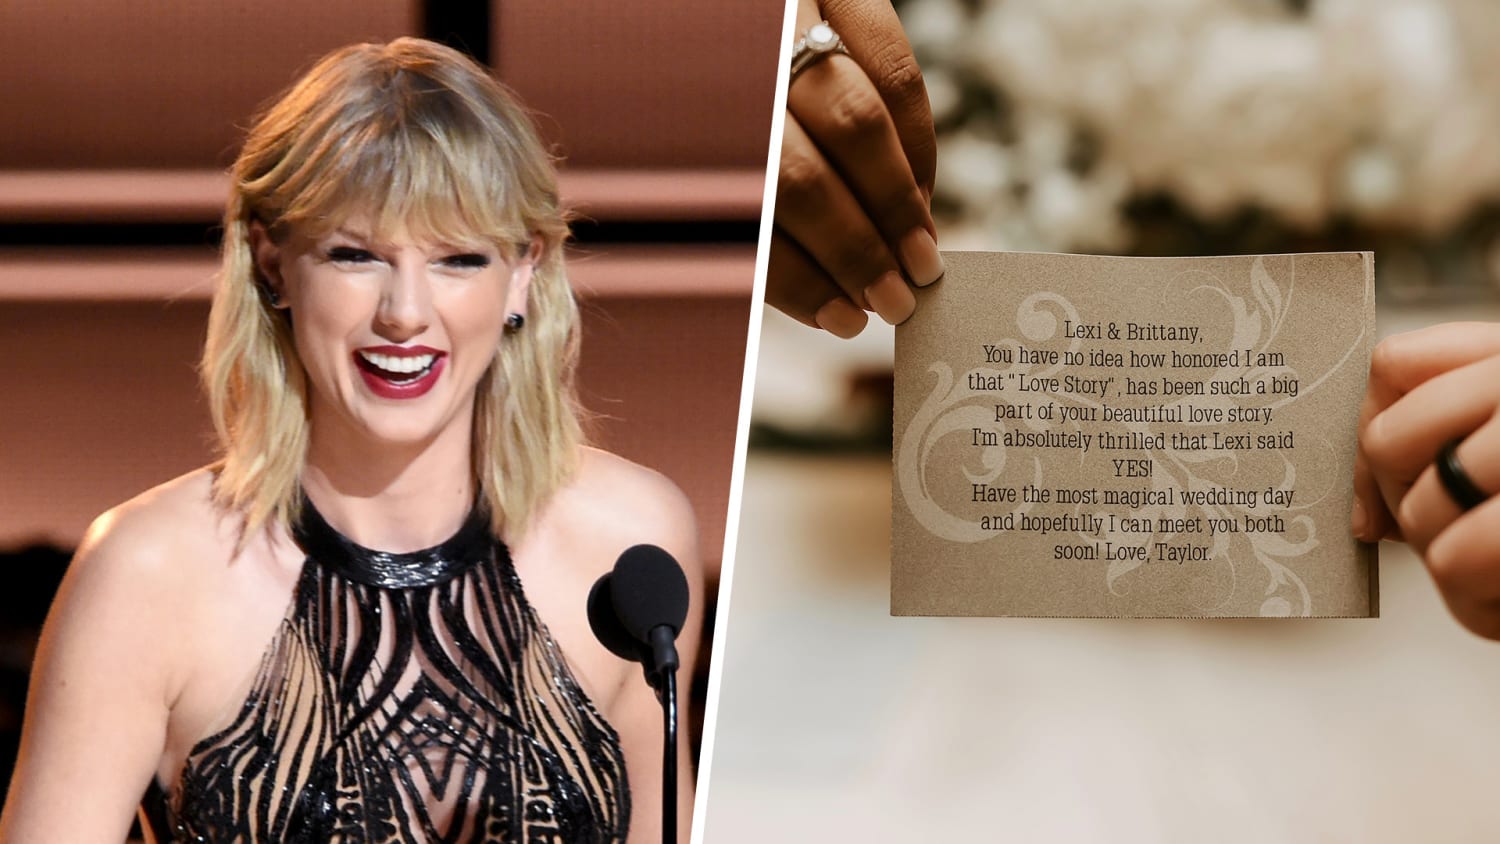 See The Sweet Note Taylor Swift Sent Newlyweds With A Modern